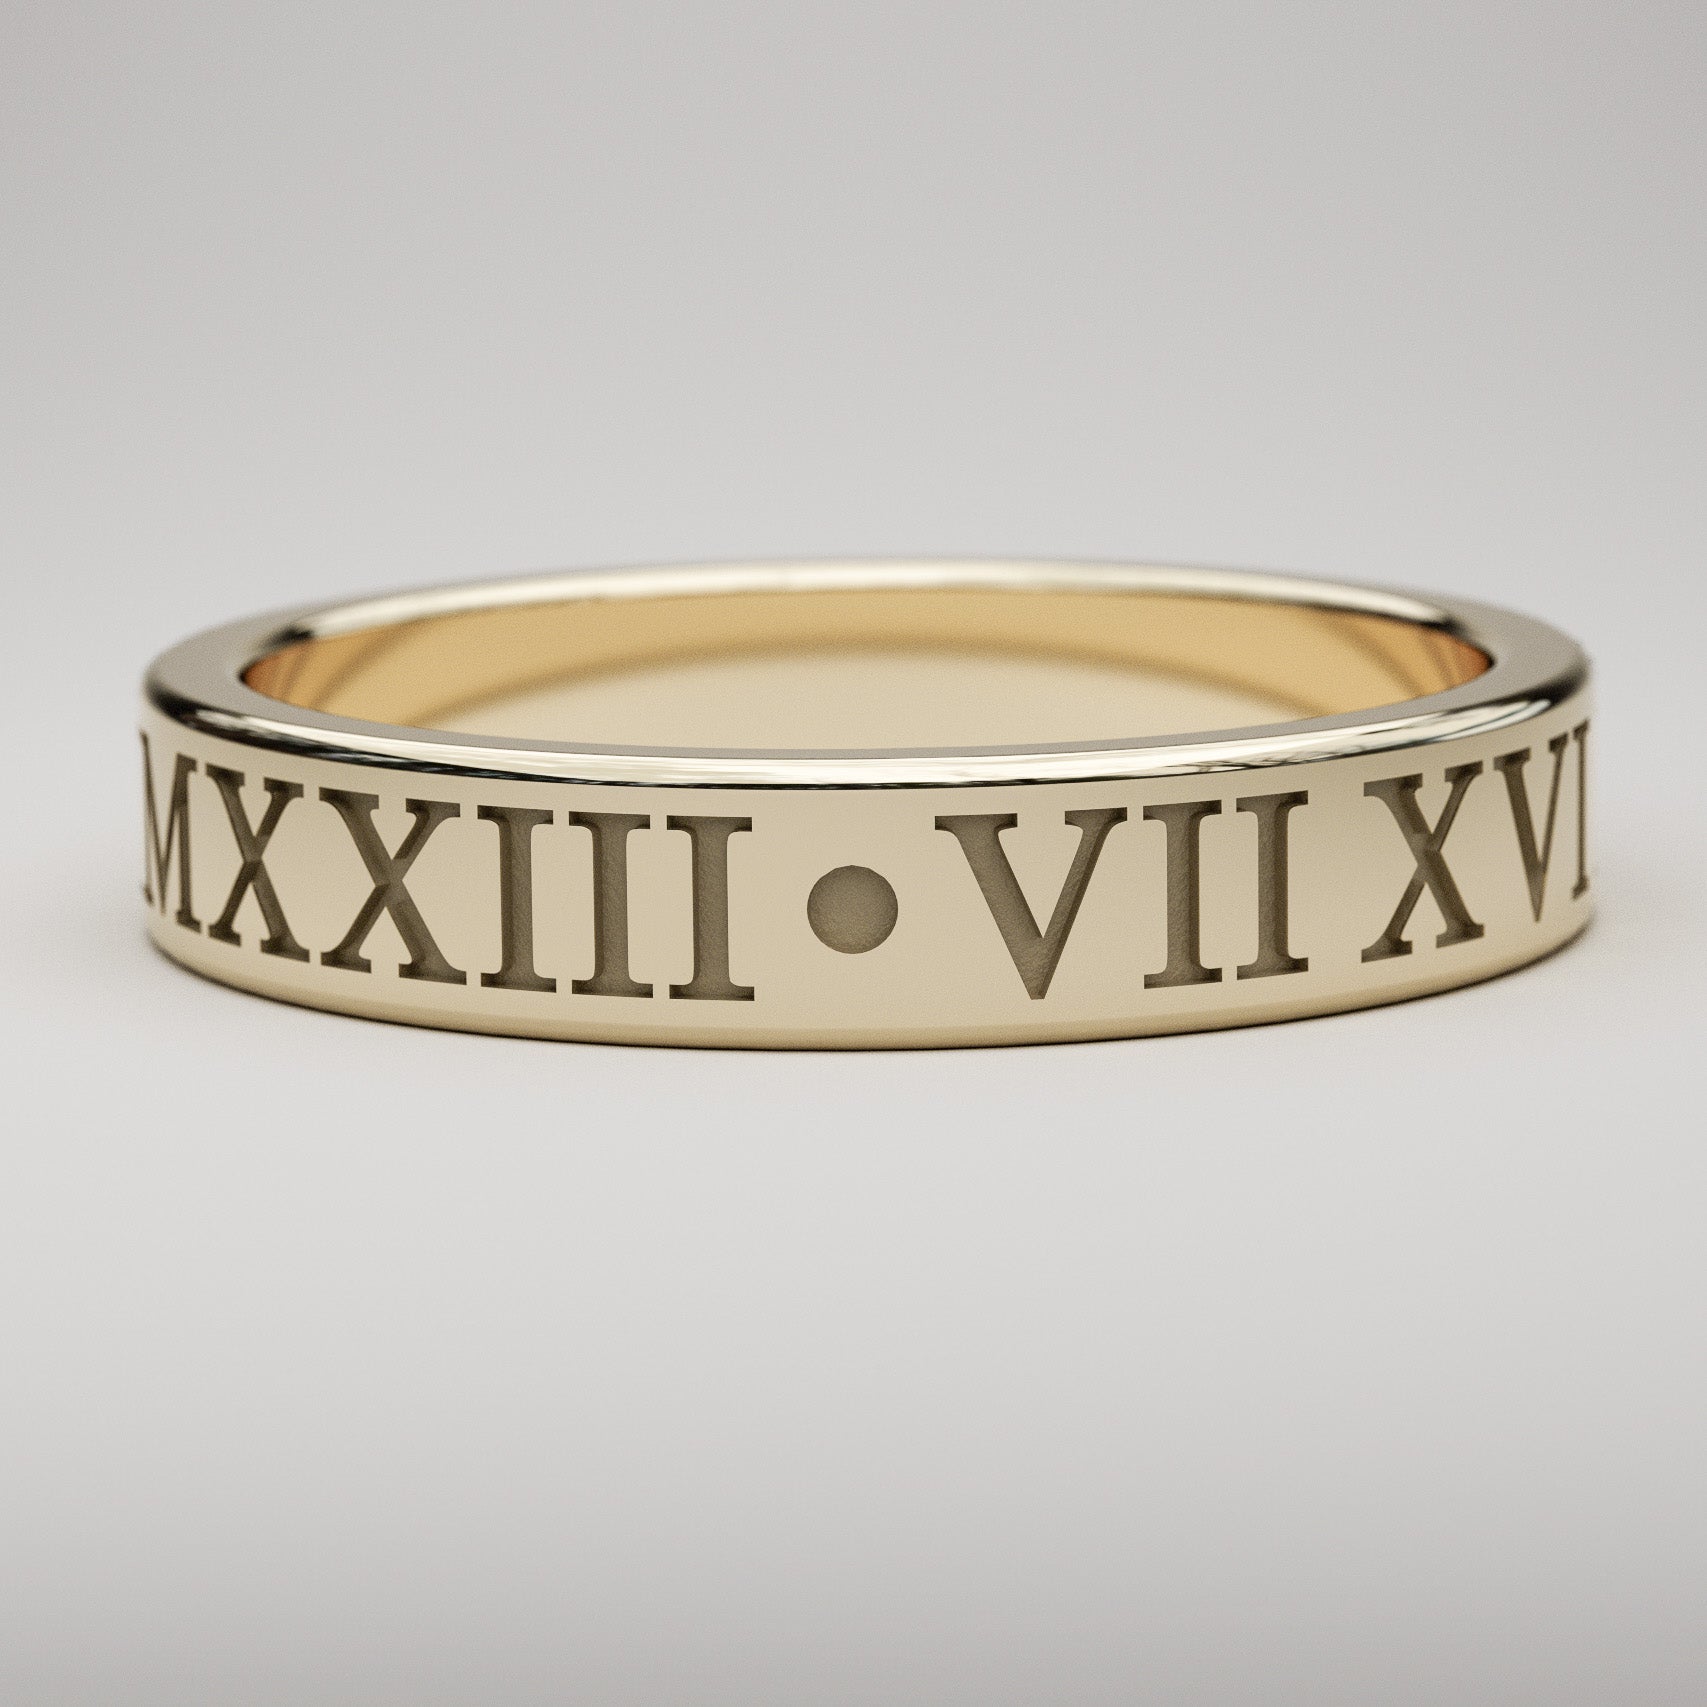 4mm wide personalized Roman Numeral band in yellow gold